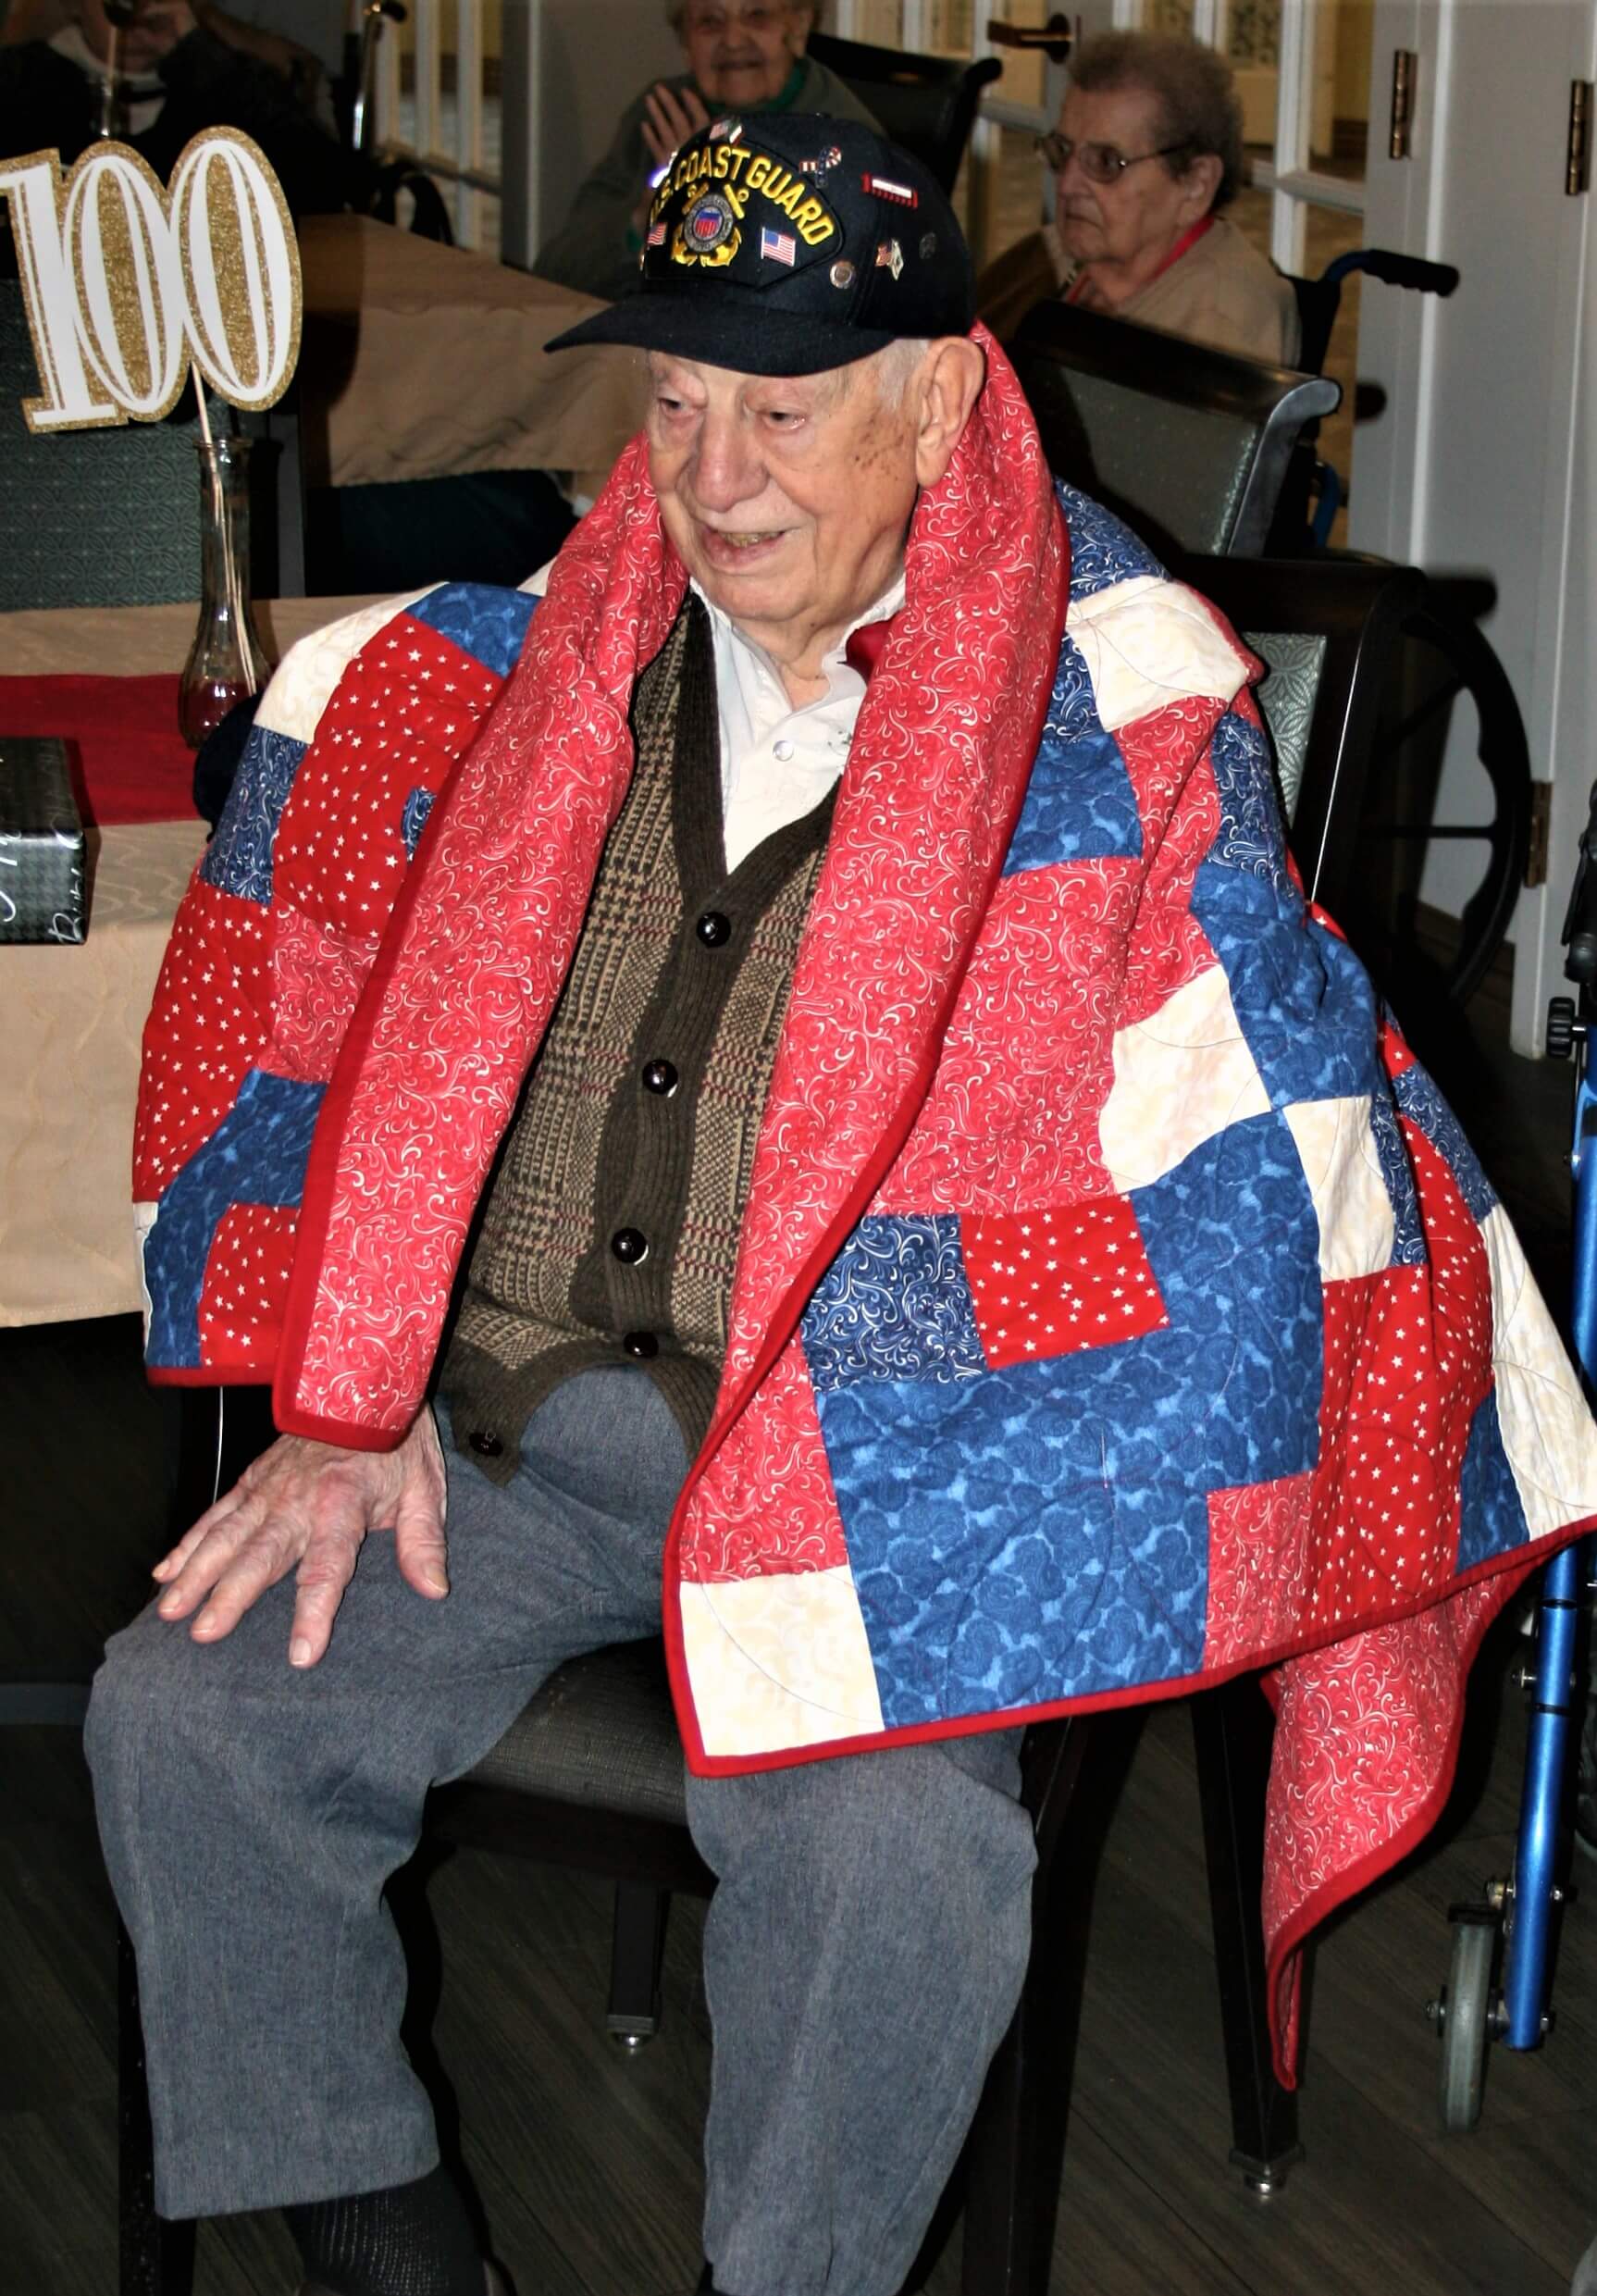 Centenarian Joseph Somma wears Quilt of Valor presented by the South Jersey Chapter Quilts of Valor for his service during World War II.